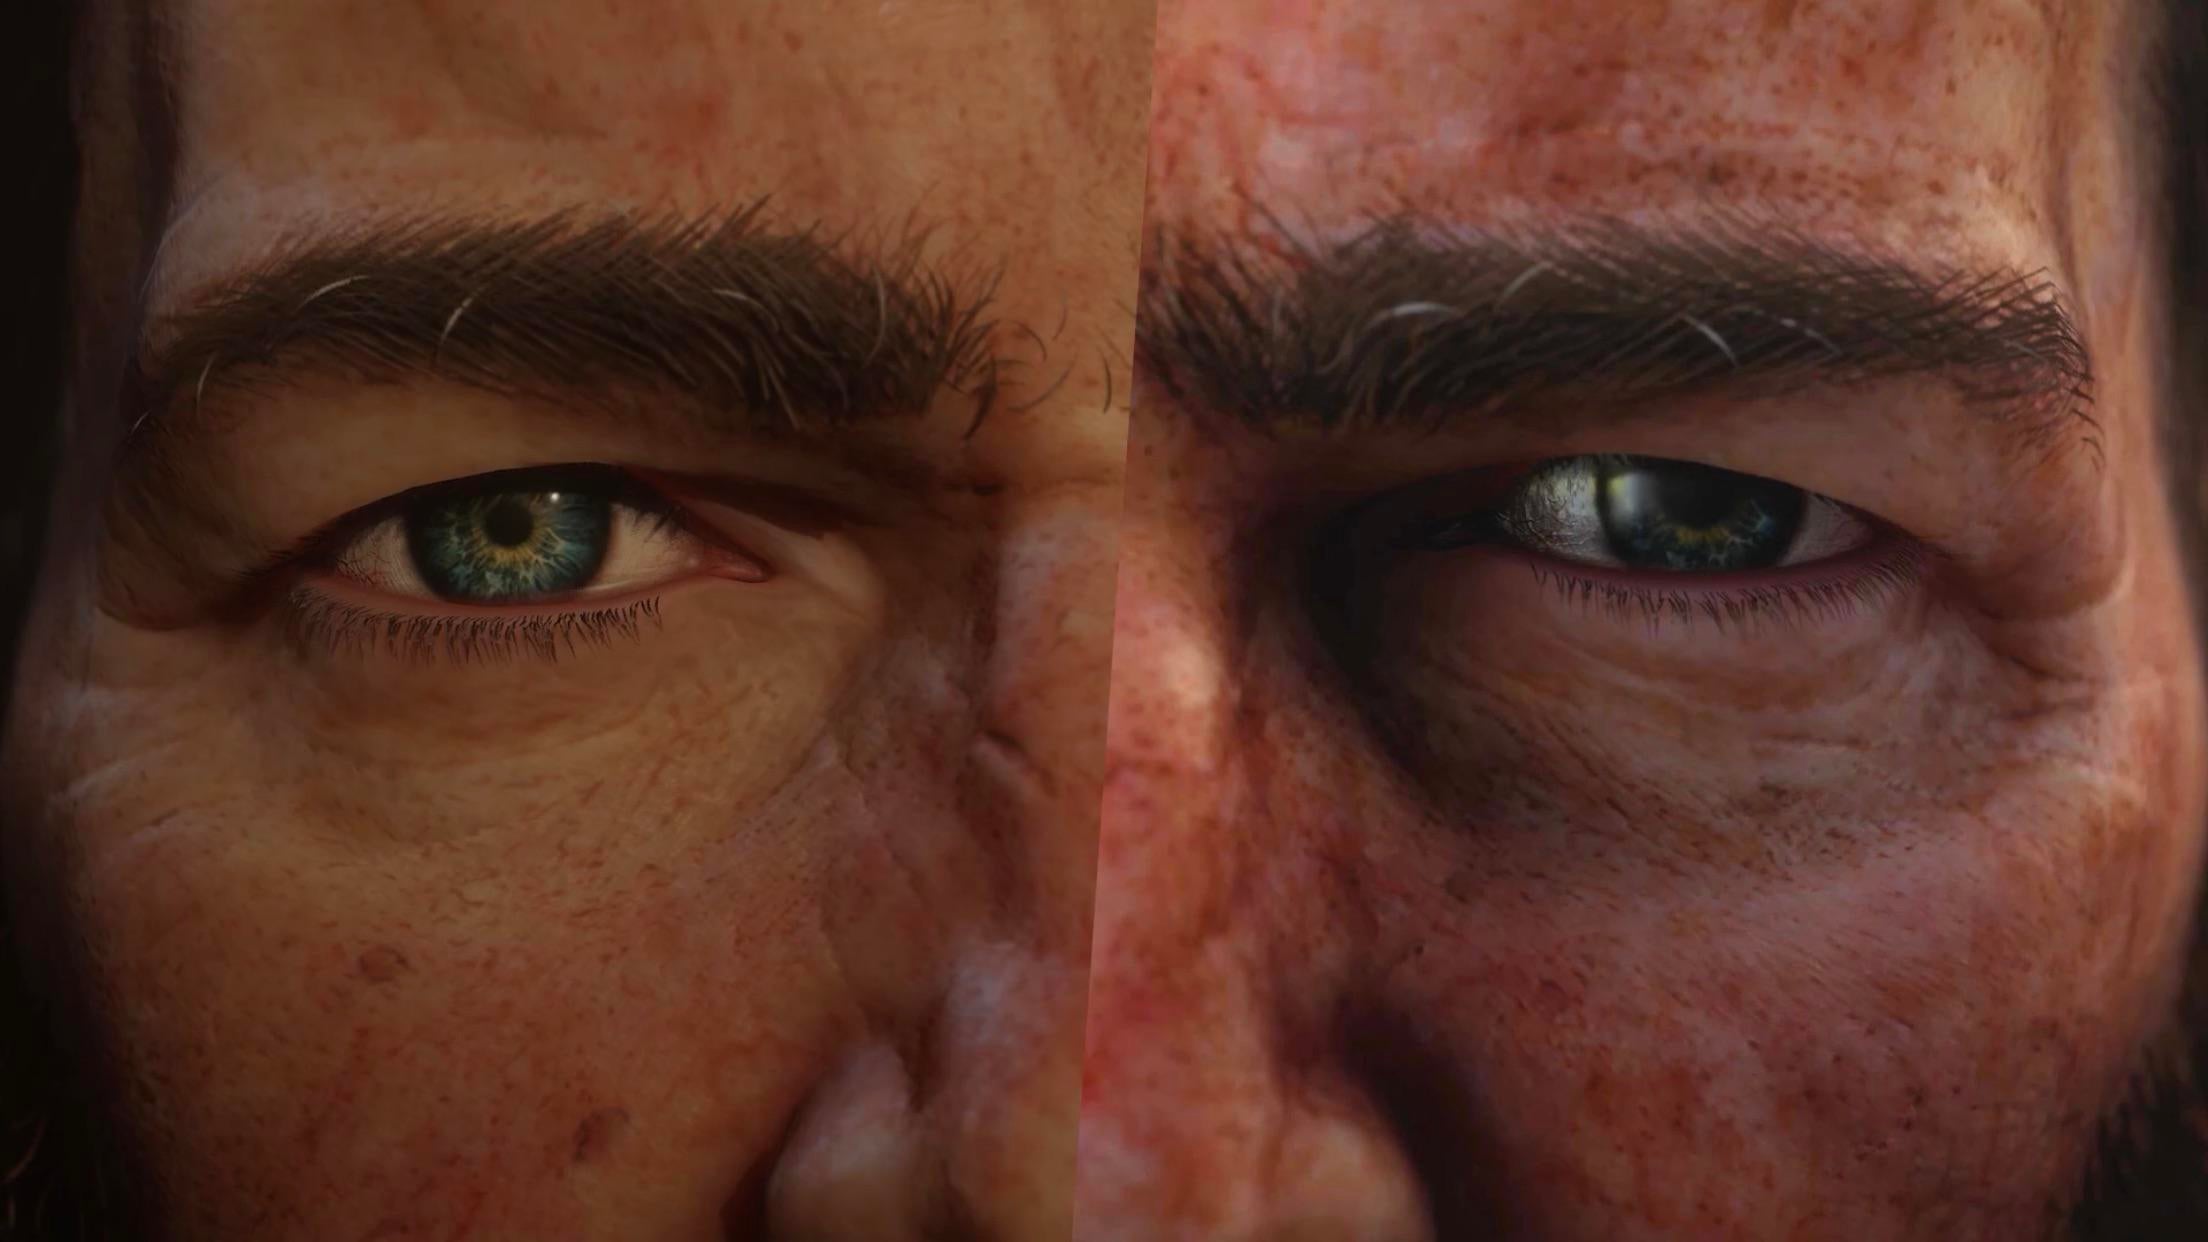 ridiculous video games details - Red Dead Redemption 2 (Pupils and Eyes)